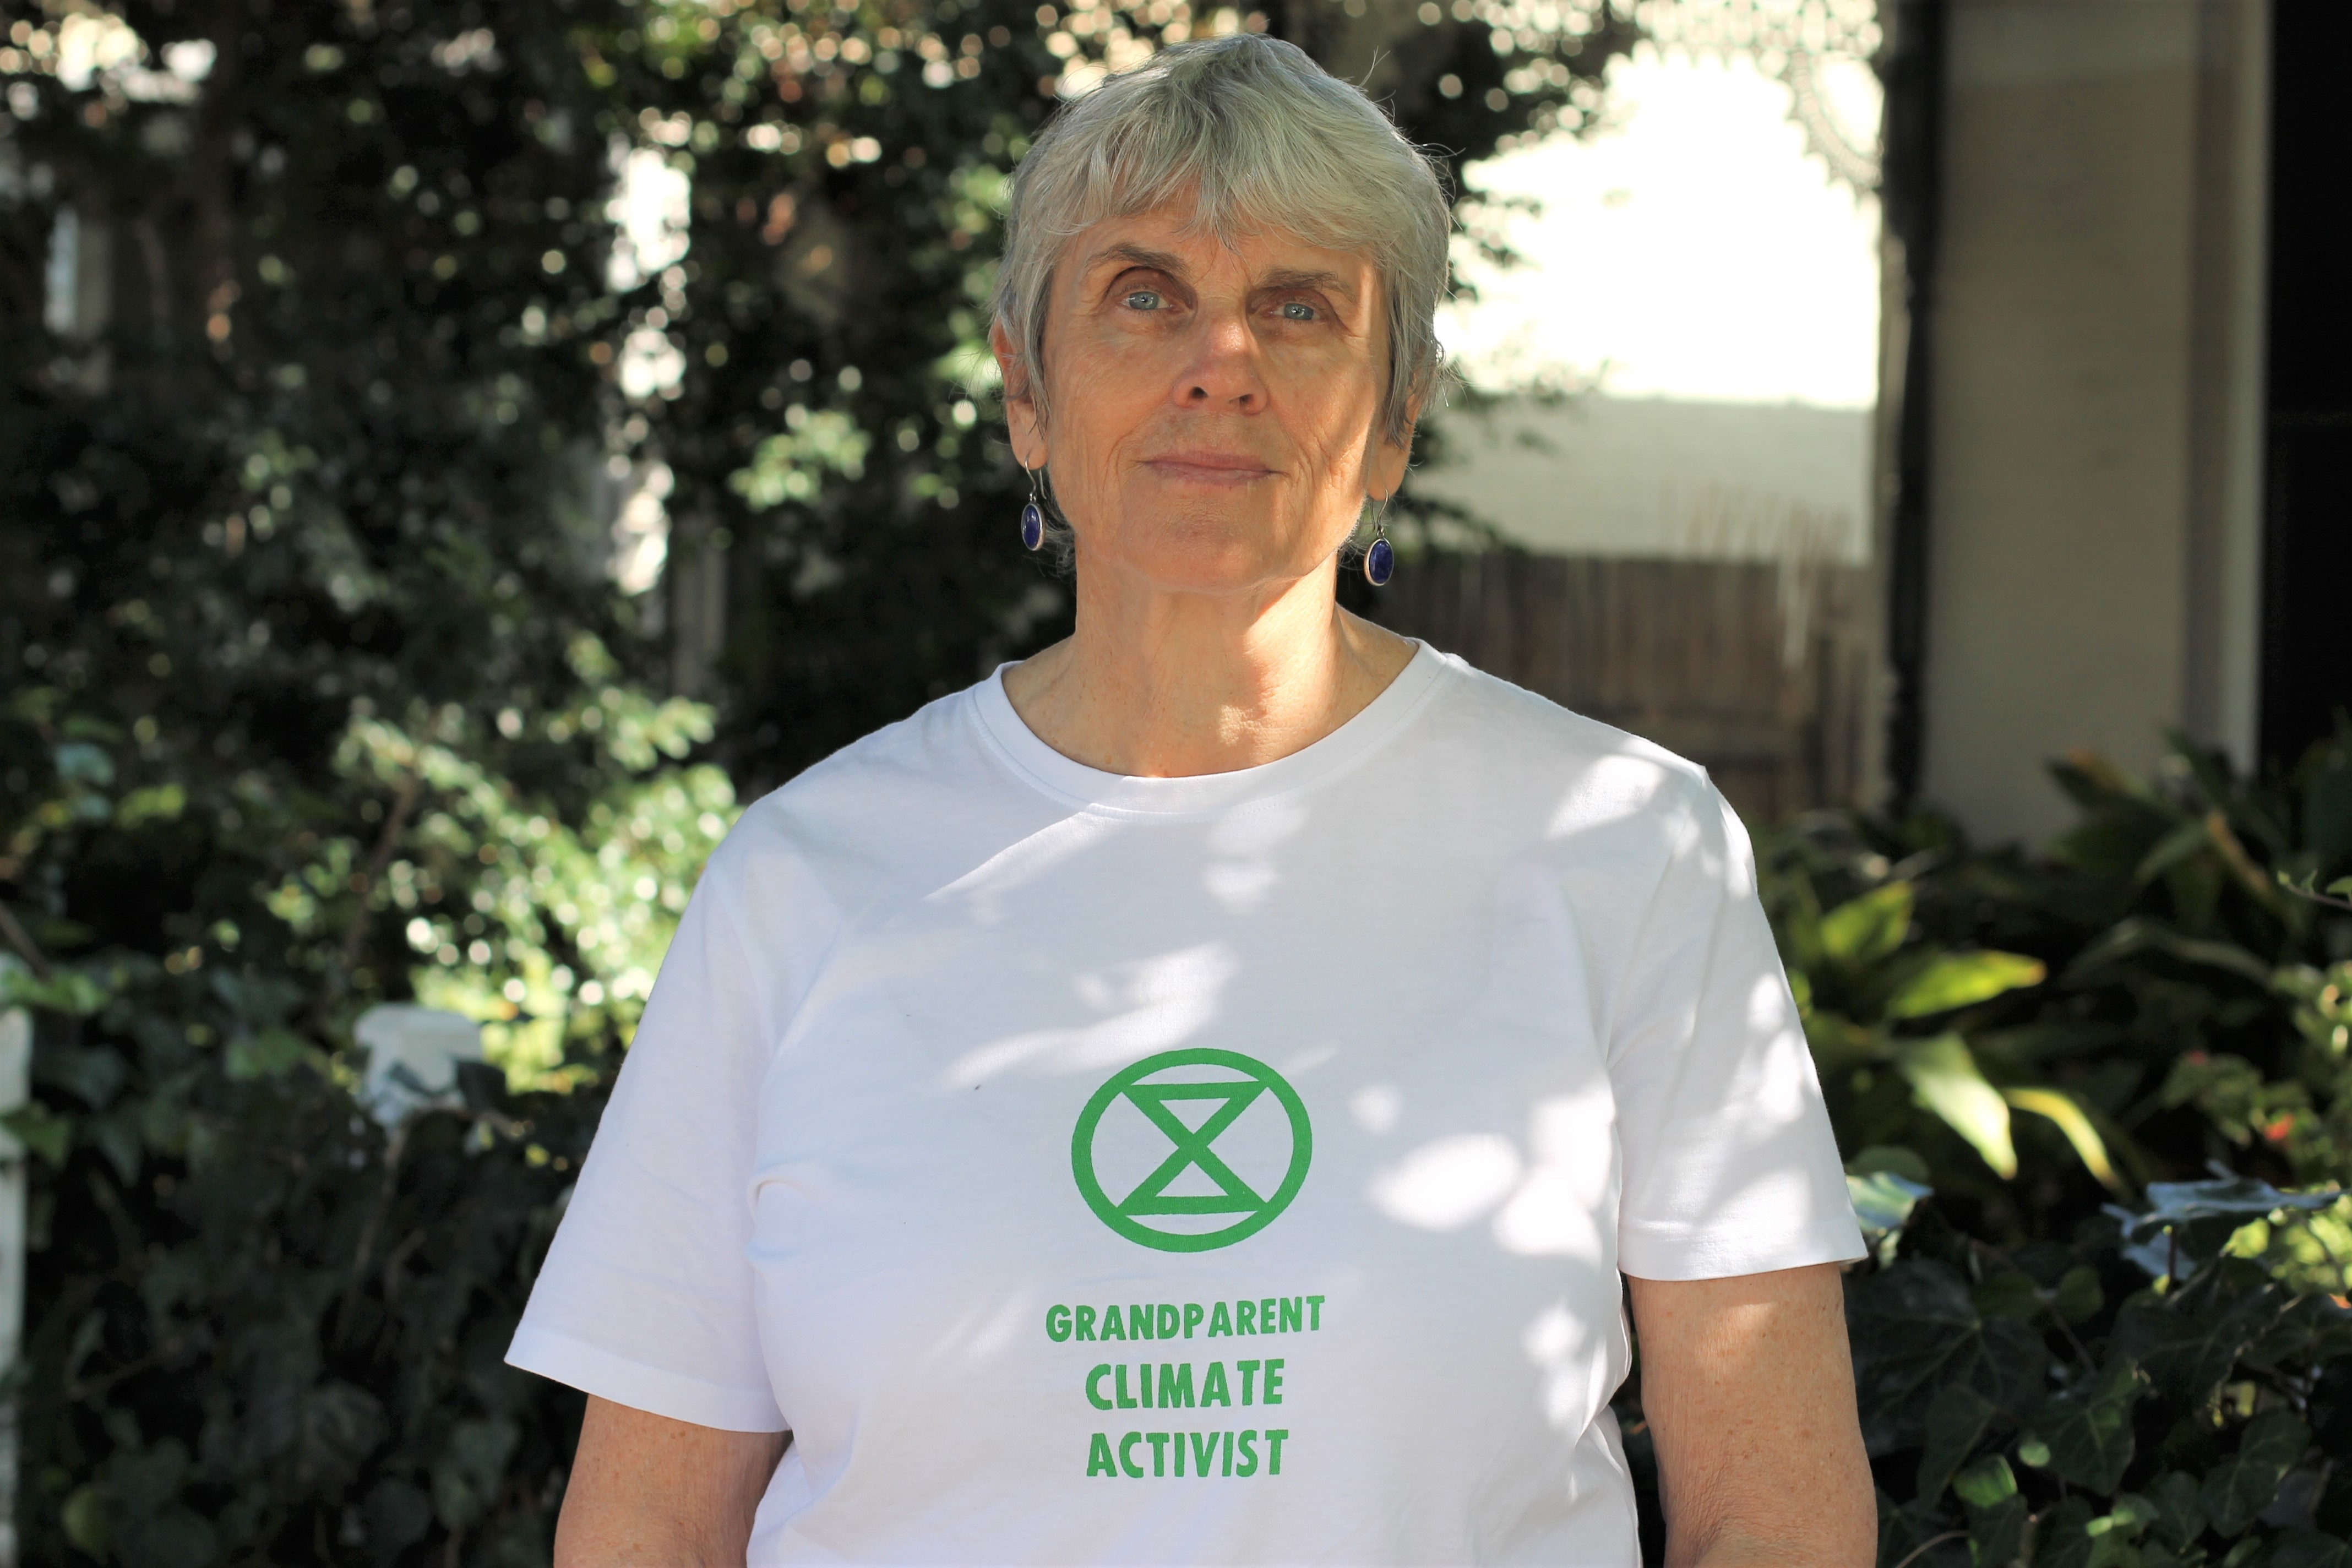 Heath Greville standing in front of a garden with a white t-shirt on with words "Grandparent climate activist"